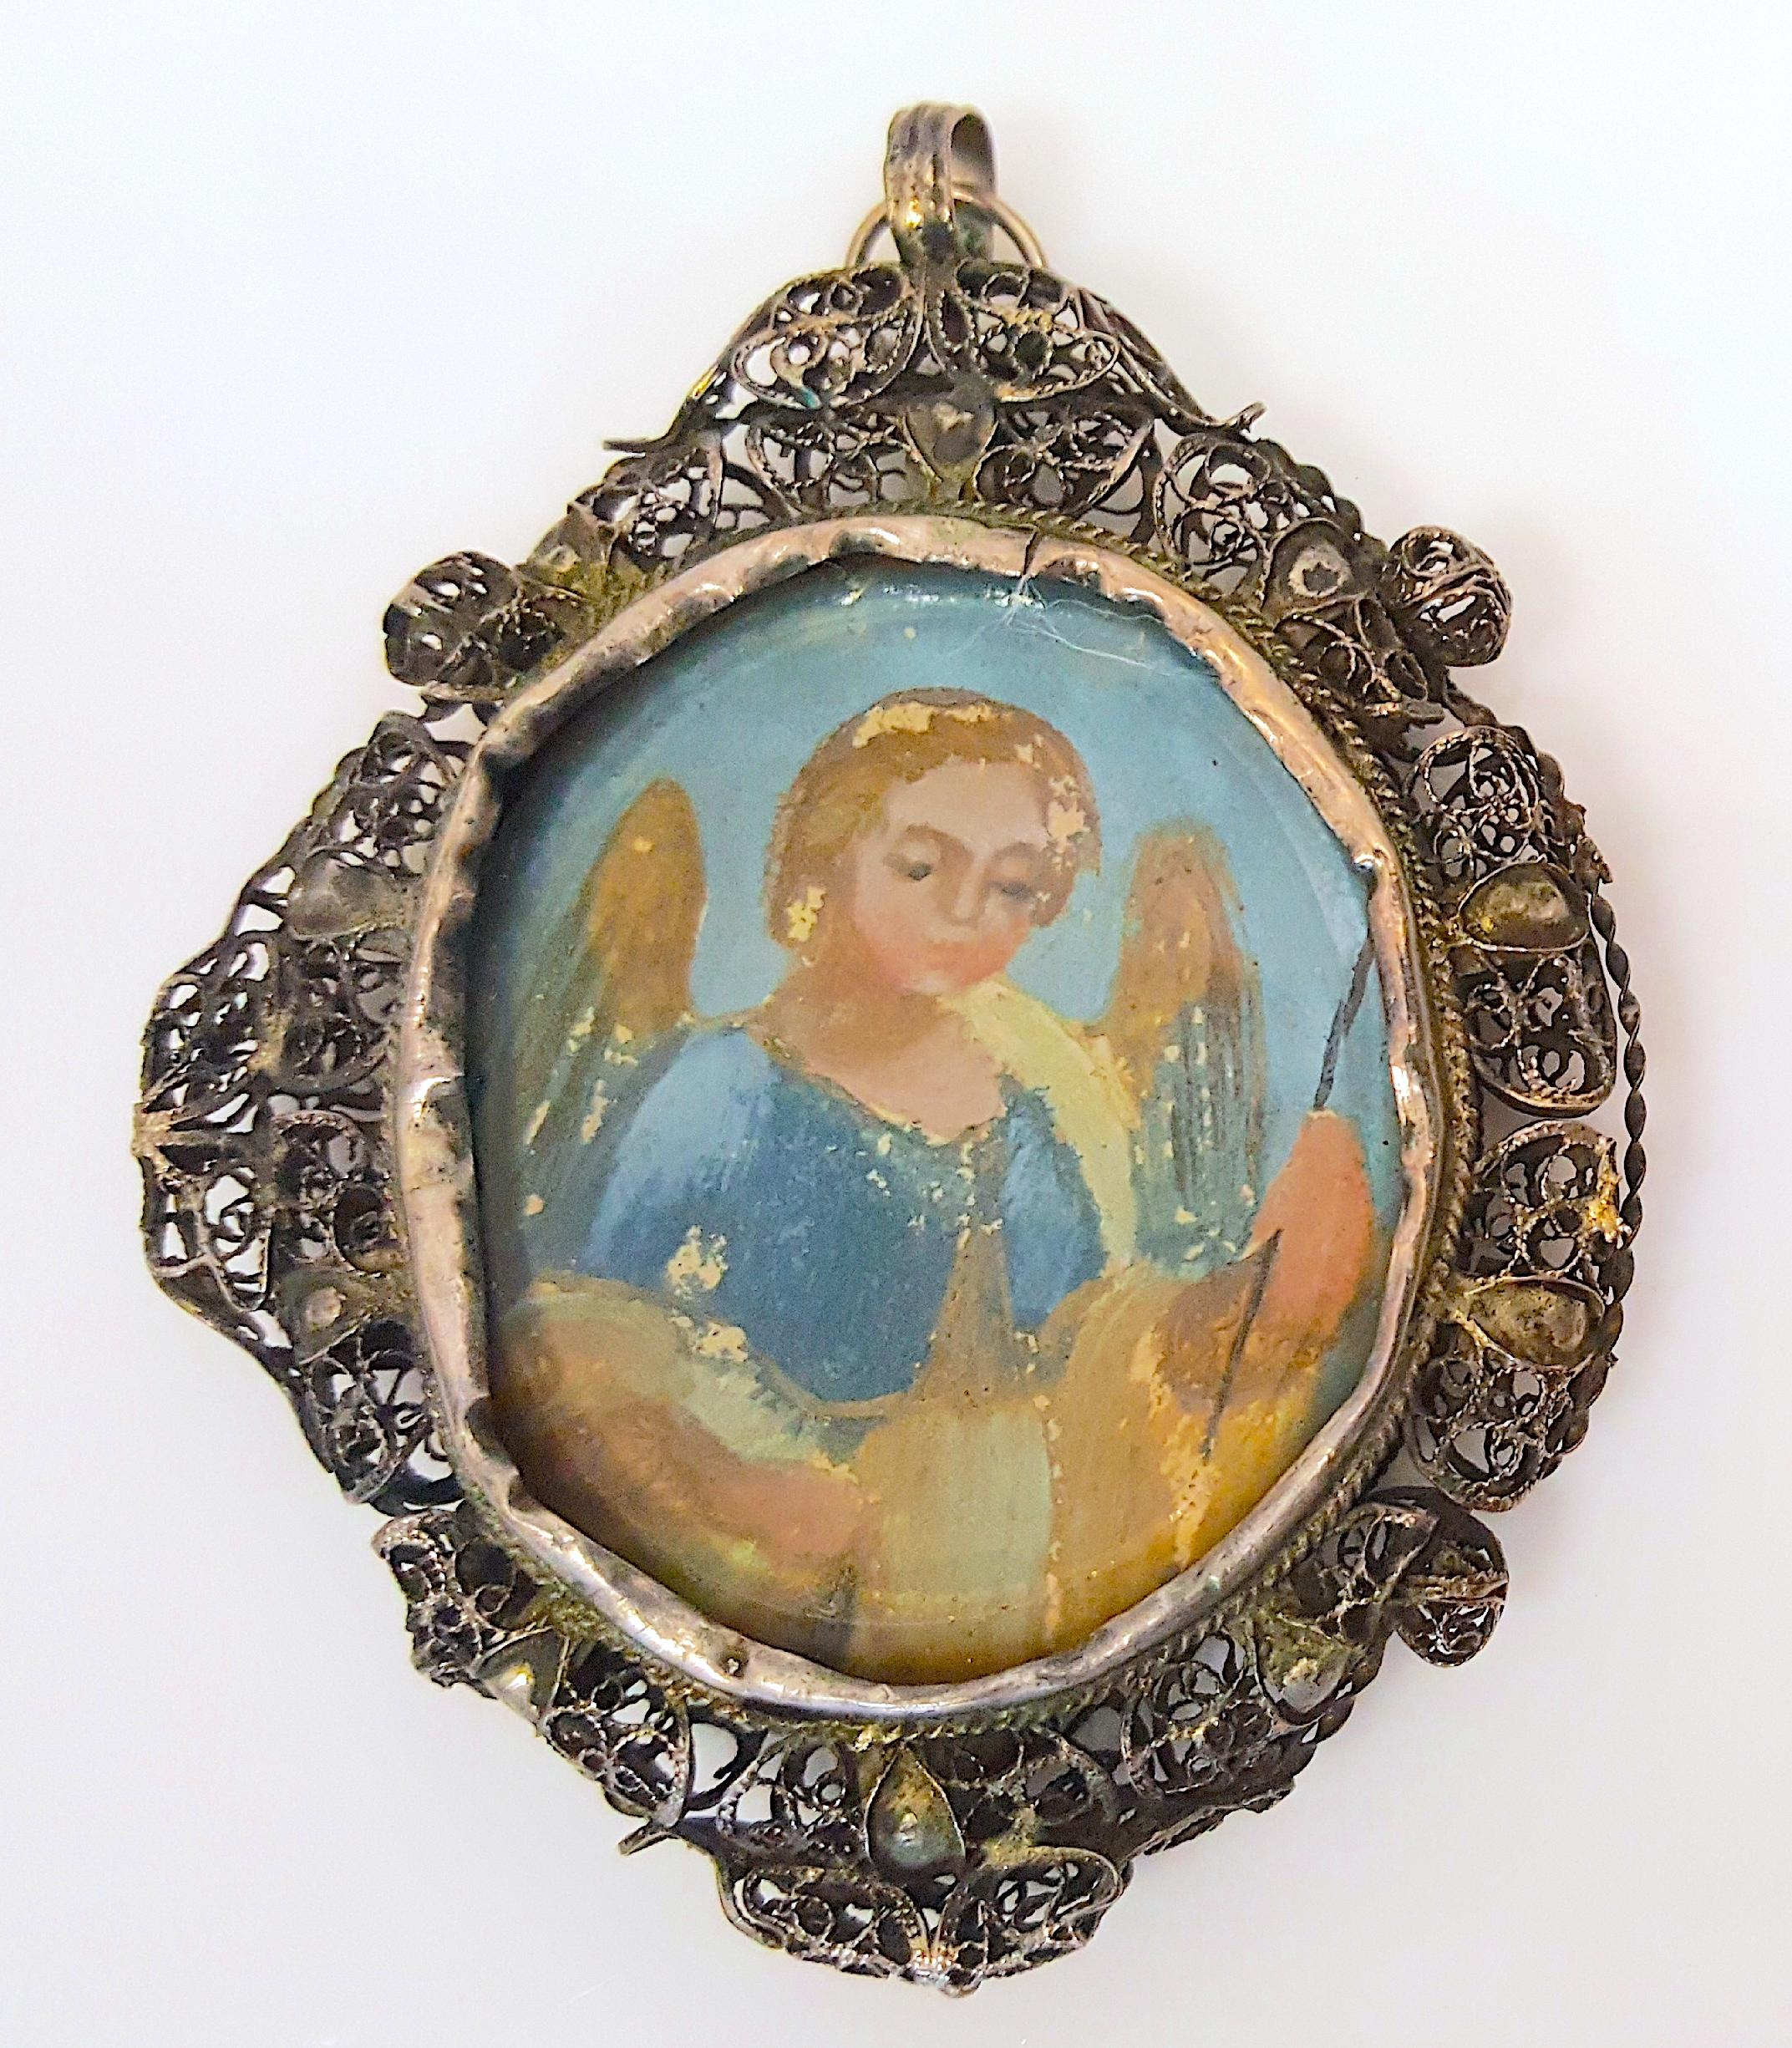 With artistic value as a Renaissance chiaroscuro painting with precious ultramarine lapis-lazuli pigment, this early 16th-Century period gilt-filigree silver pendant medallion encases a colorful figure of a winged angel with a staff in its left